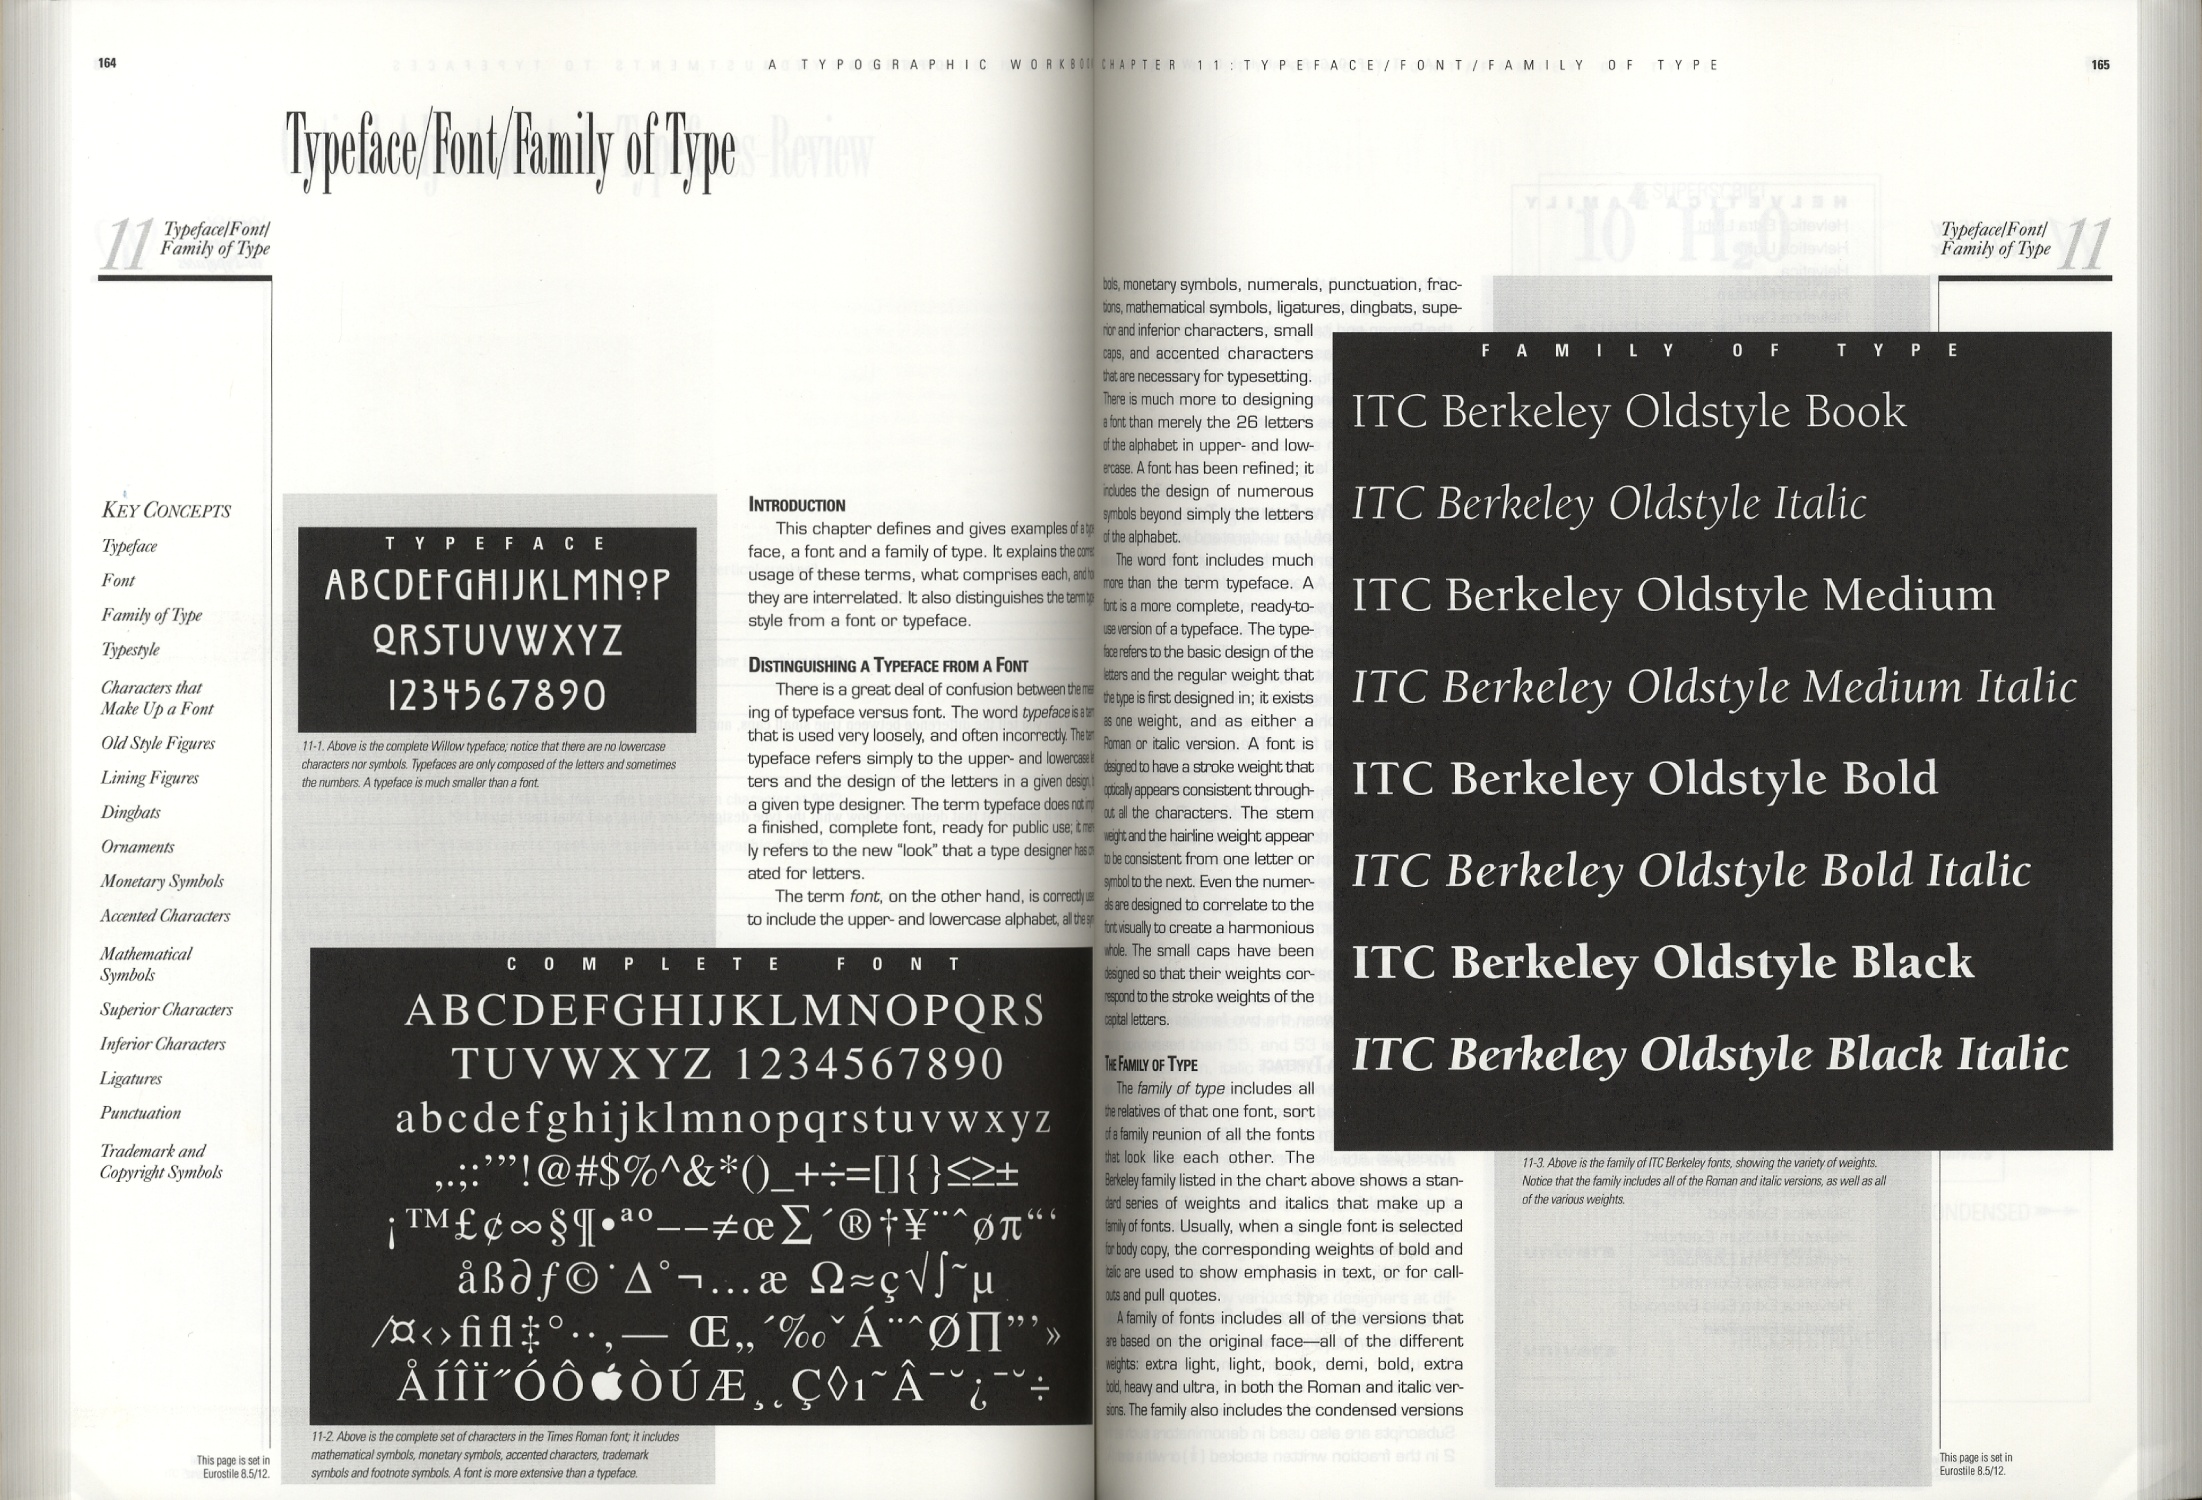 A Typographic Workbook　A Primer to History､ Techniques､ and Artistry［image4］